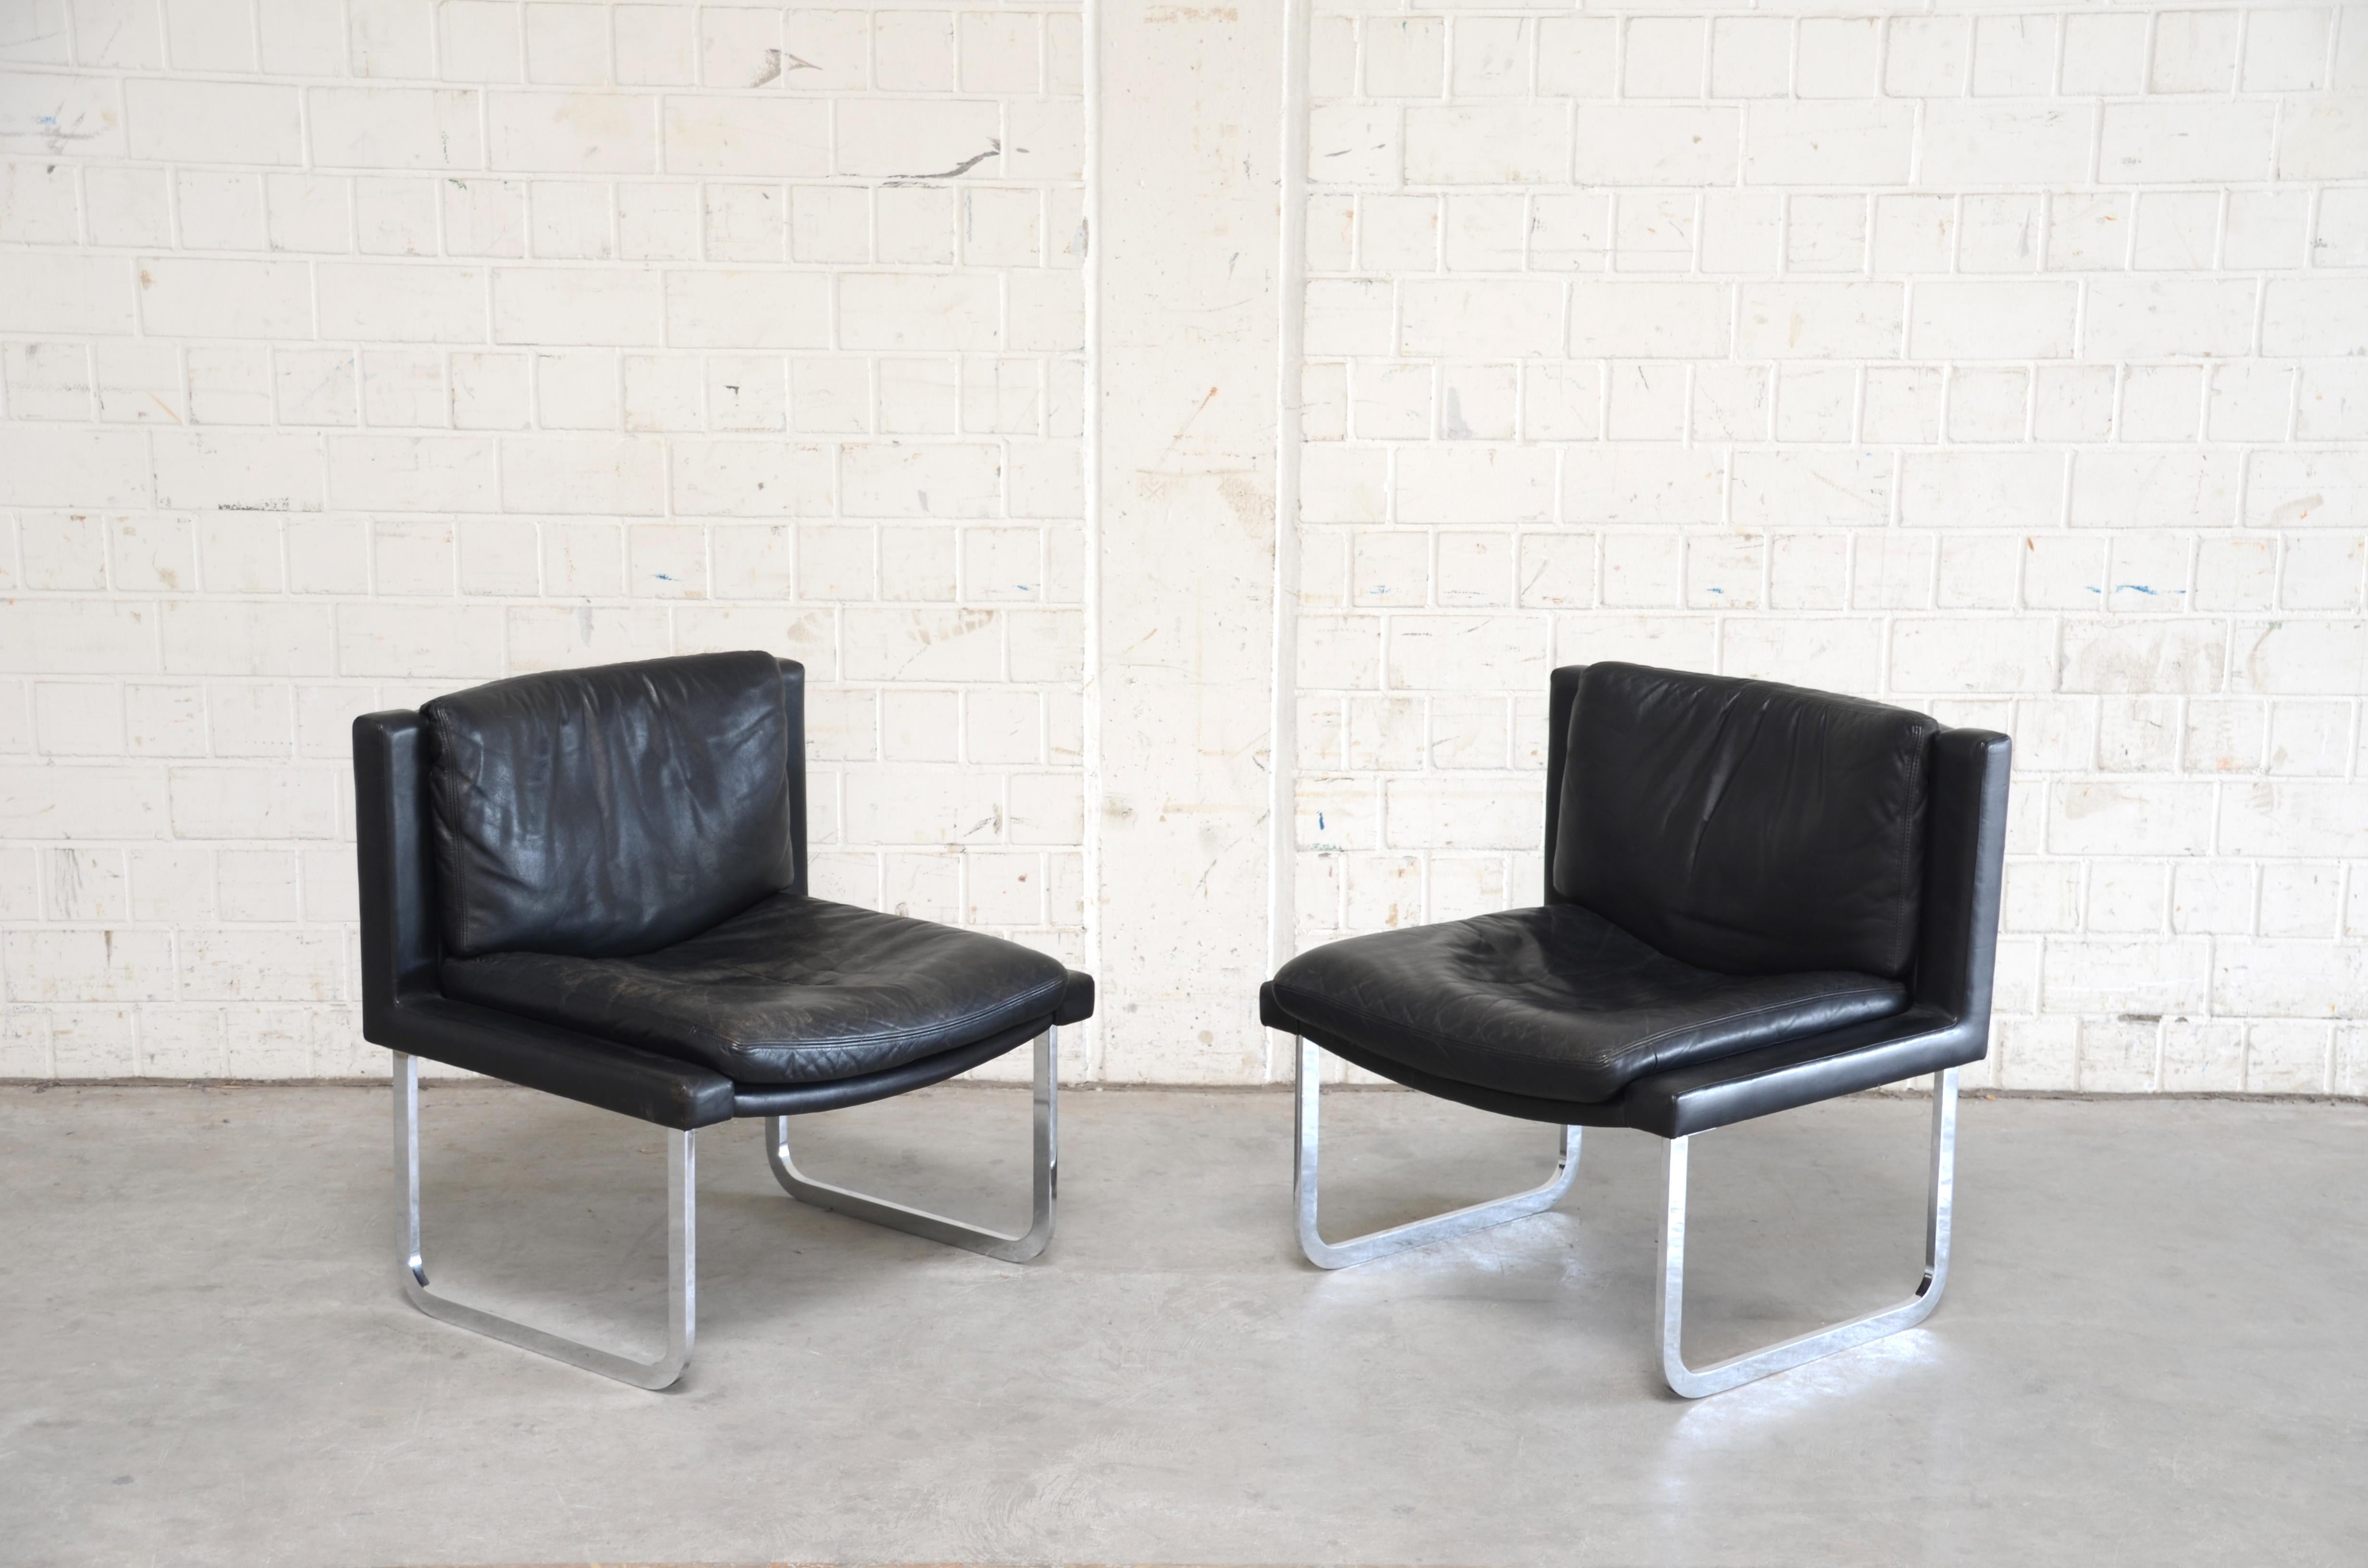 De Sede leather chair RH 201.
Design by Robert Haussmann.
Black aniline leather.
Chrome feet and steel.
Nice pair of chairs.

 